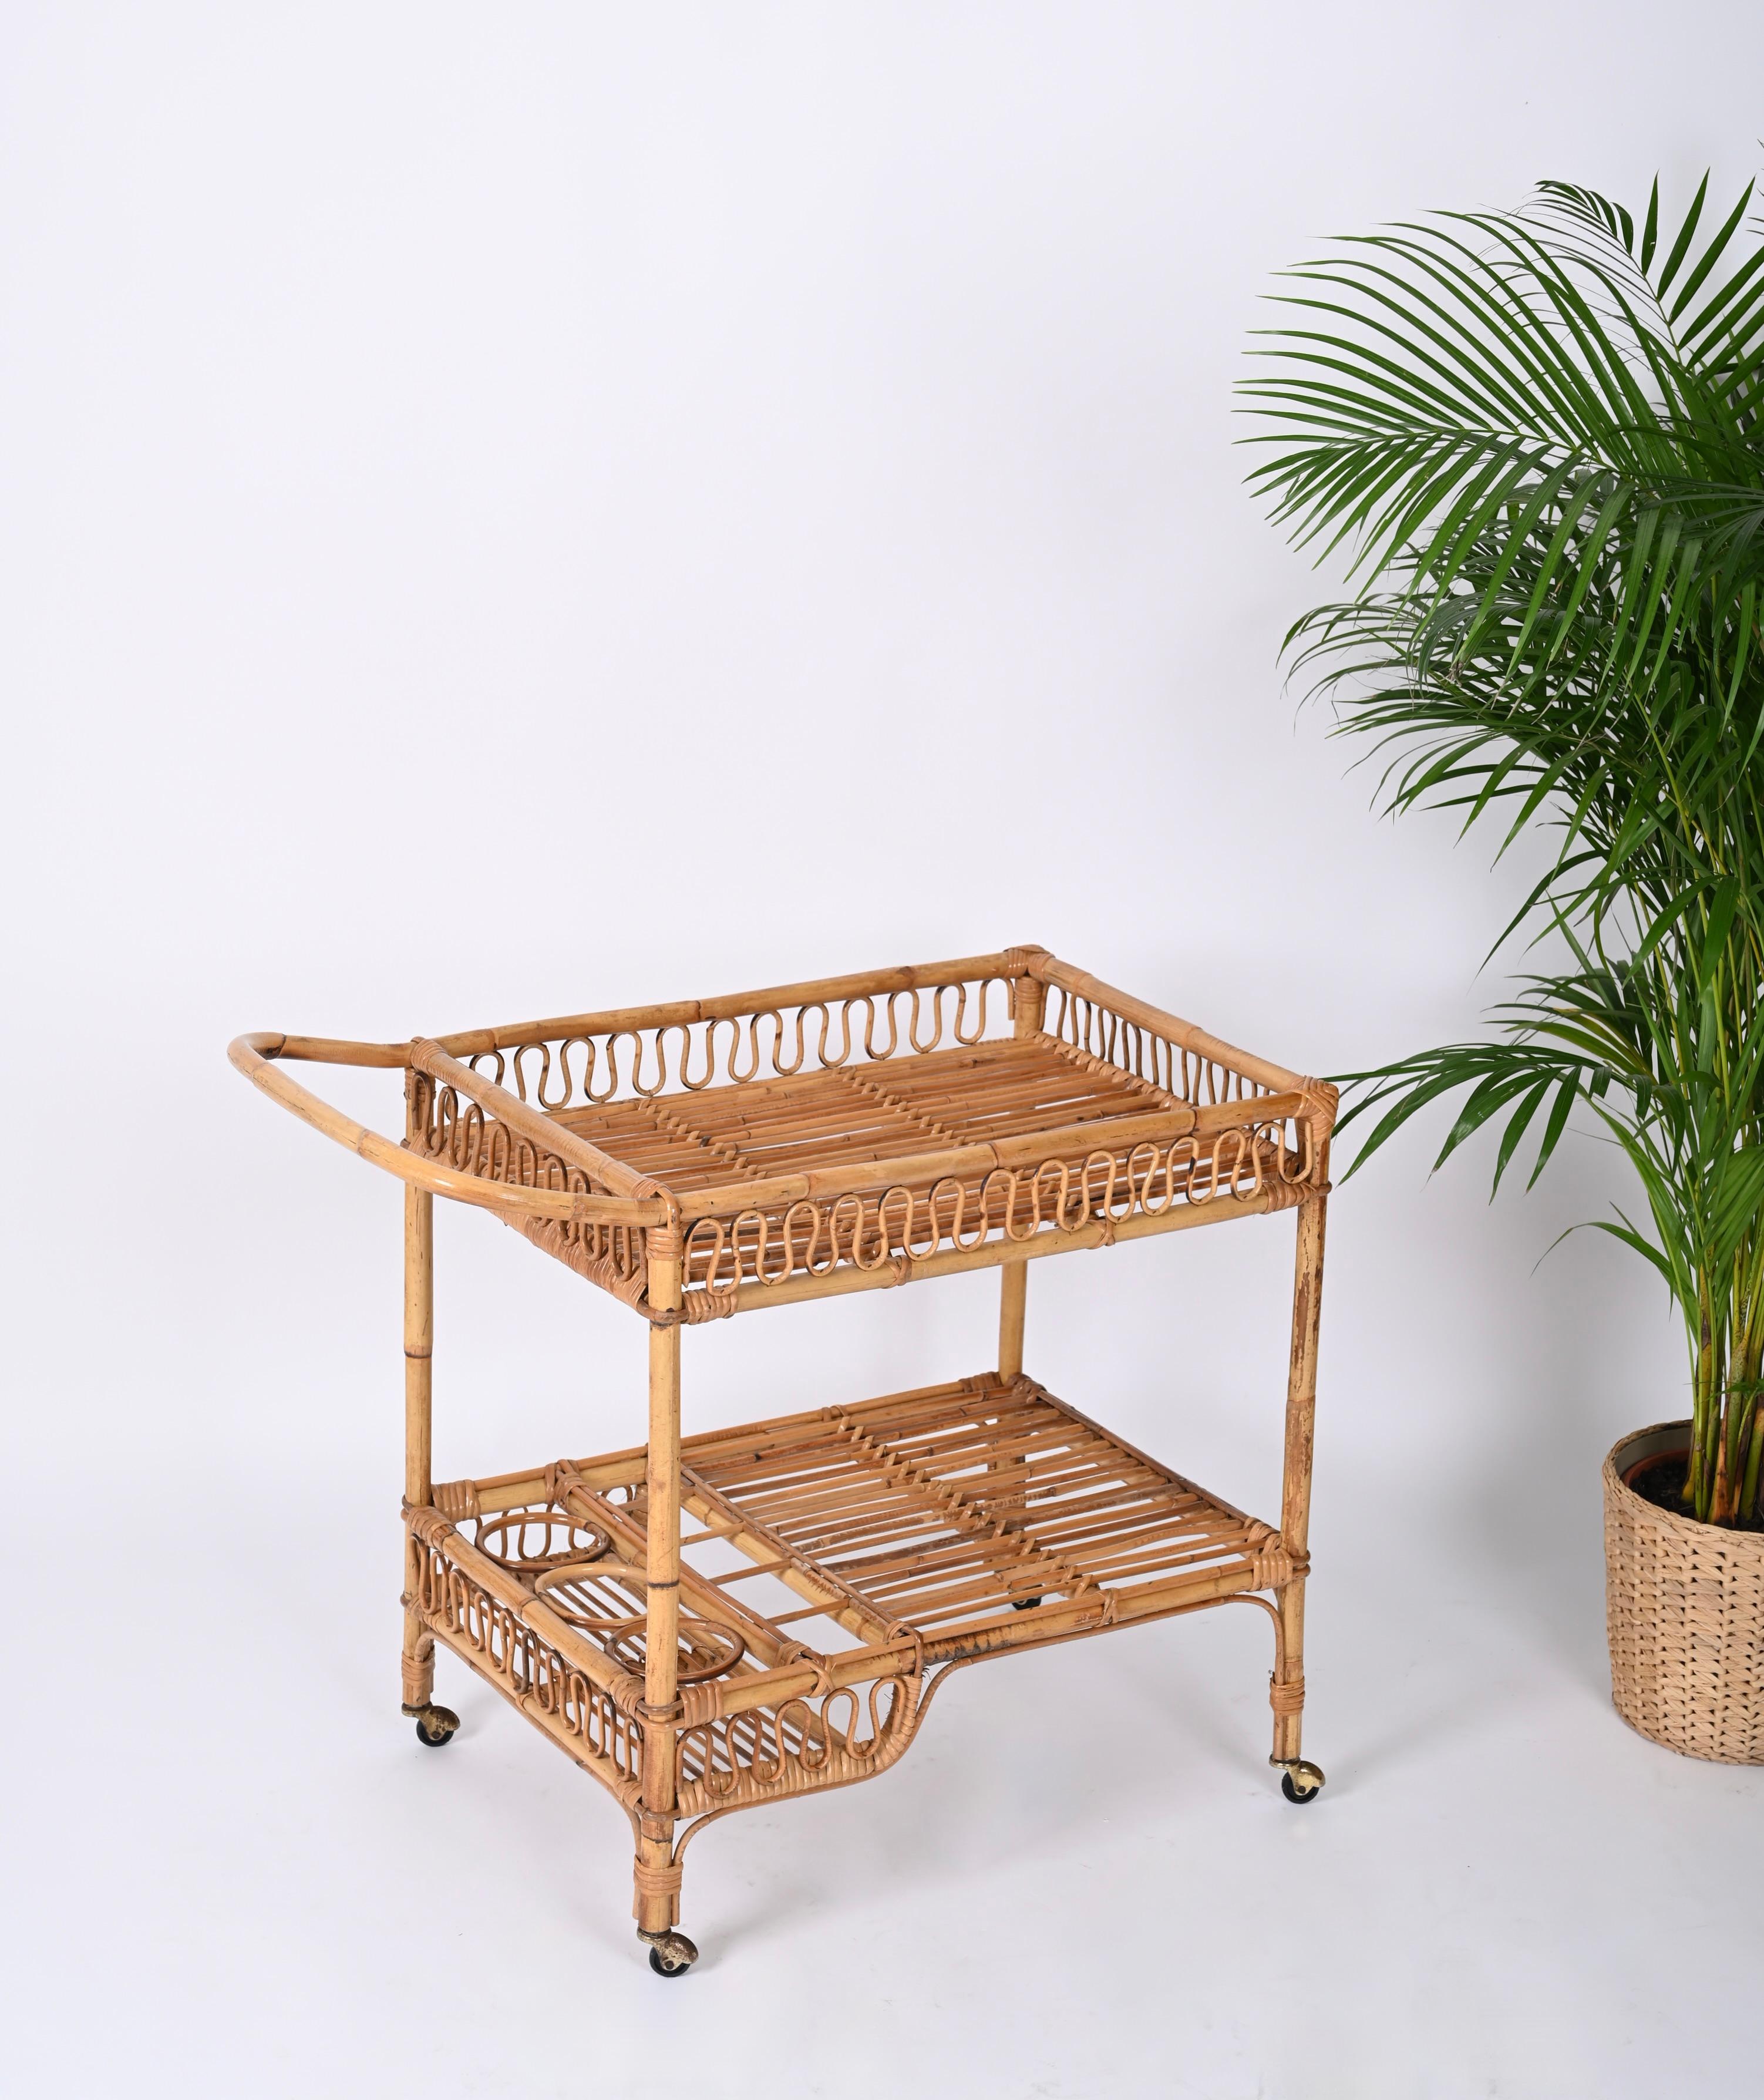 Marvellous mid-century rectangular bar cart trolley fully made in bamboo and curved rattan. This unique piece was hand-made with perfect proportions, great example of fine Italian craftsmanship from the 60s.

A wonderful piece with incredible